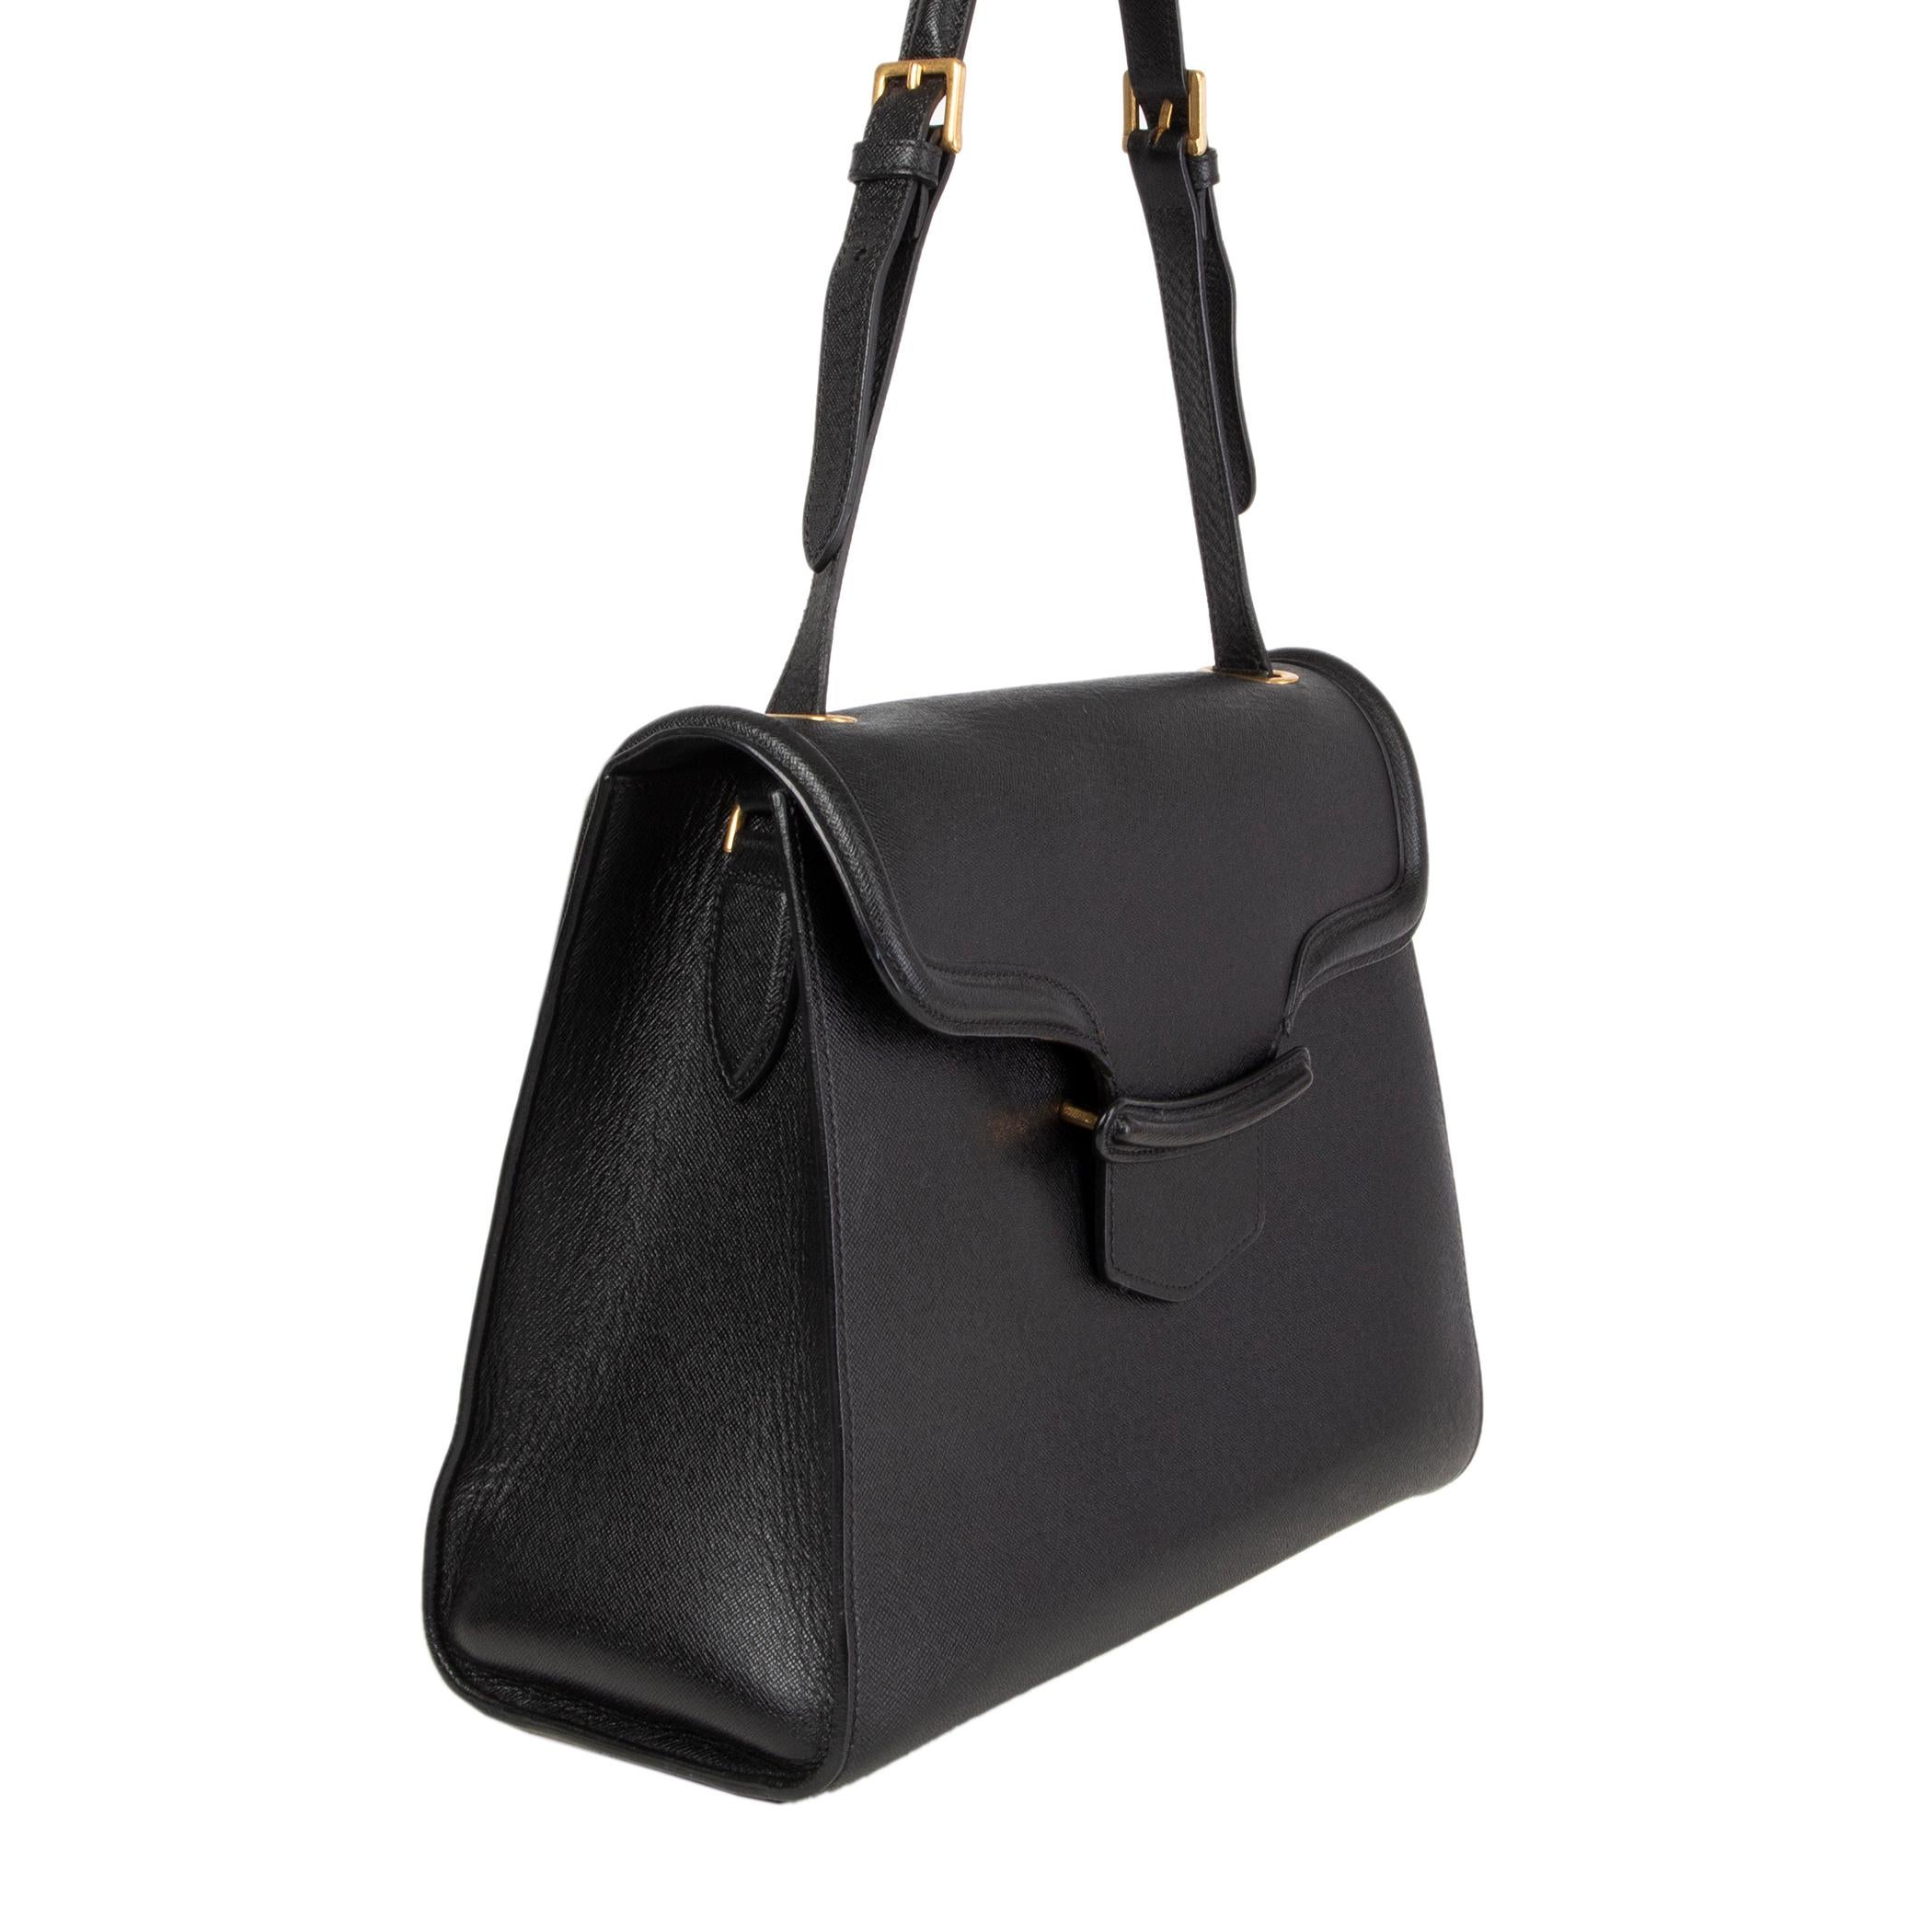 Alexander McQueen 'Heroine' shoulder bag in black textured leather. Lined in black suede with two open pockets against the front and a zipper pocket against the back. Has been carried and is in excellent condition.

Height 26cm (10.1in)
Width 34cm